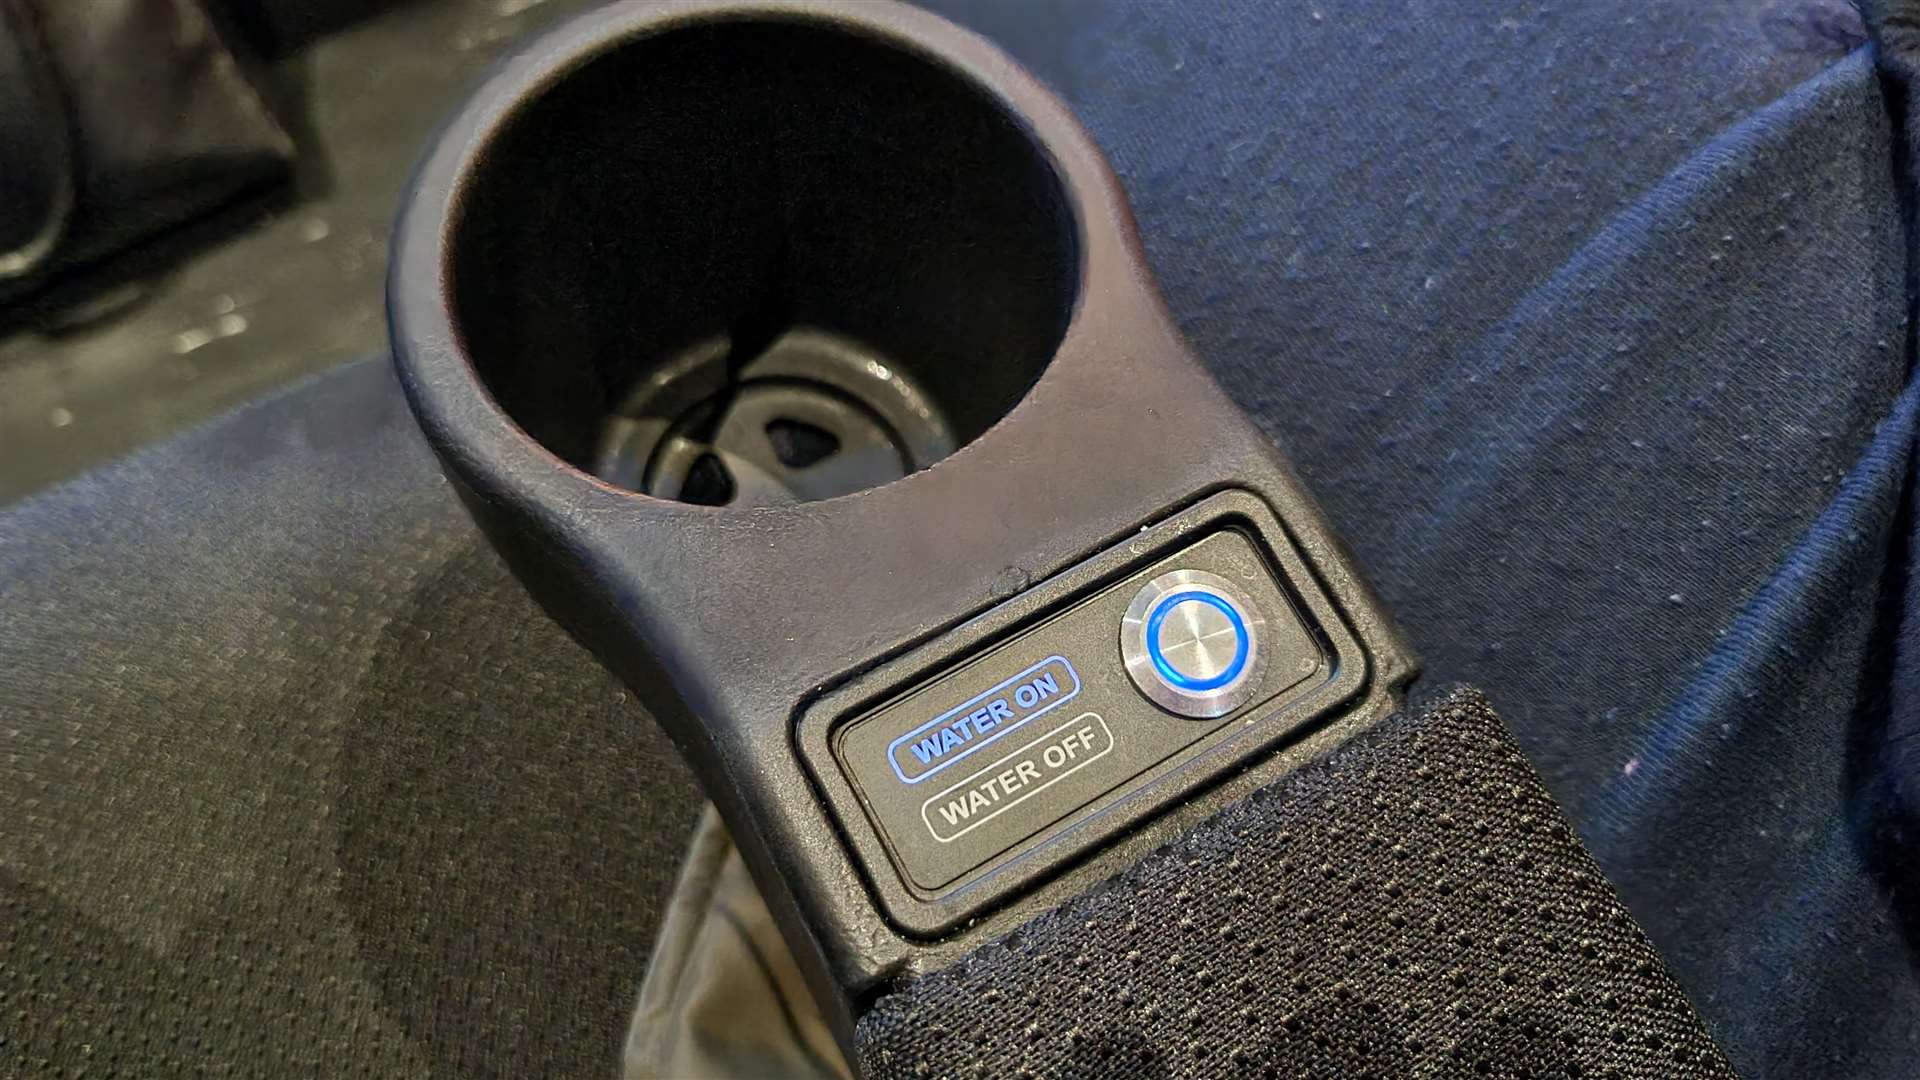 You can turn the water off with a button on the armrest